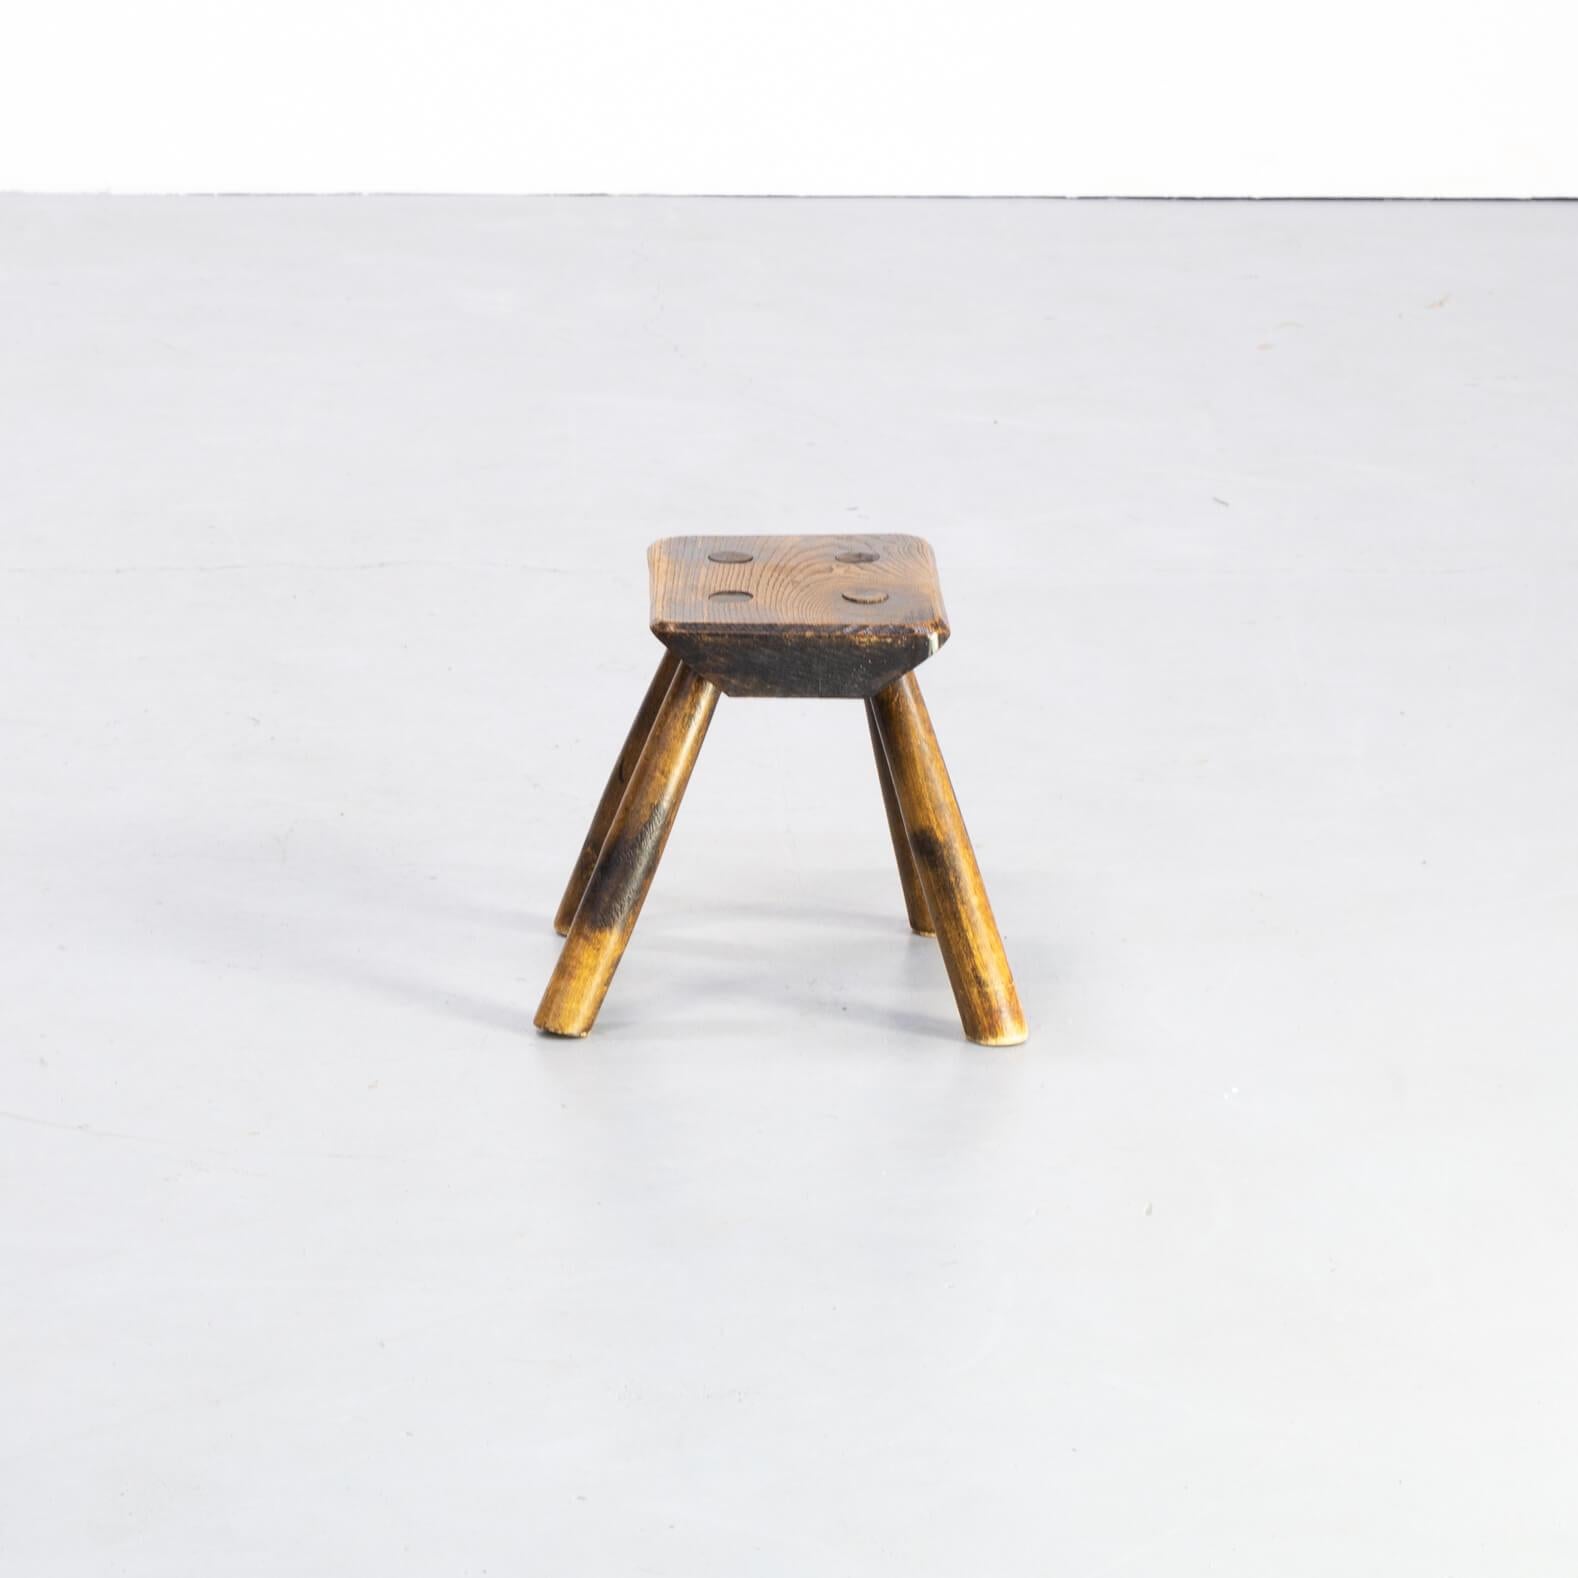 Sometimes it is simple true. Size does matter. This small full oak stool has been made about one century ago. Based on the aging of metarial and the manner of production. Beautiful in it's simplicity. Can be used as minor stool, plant stand, but